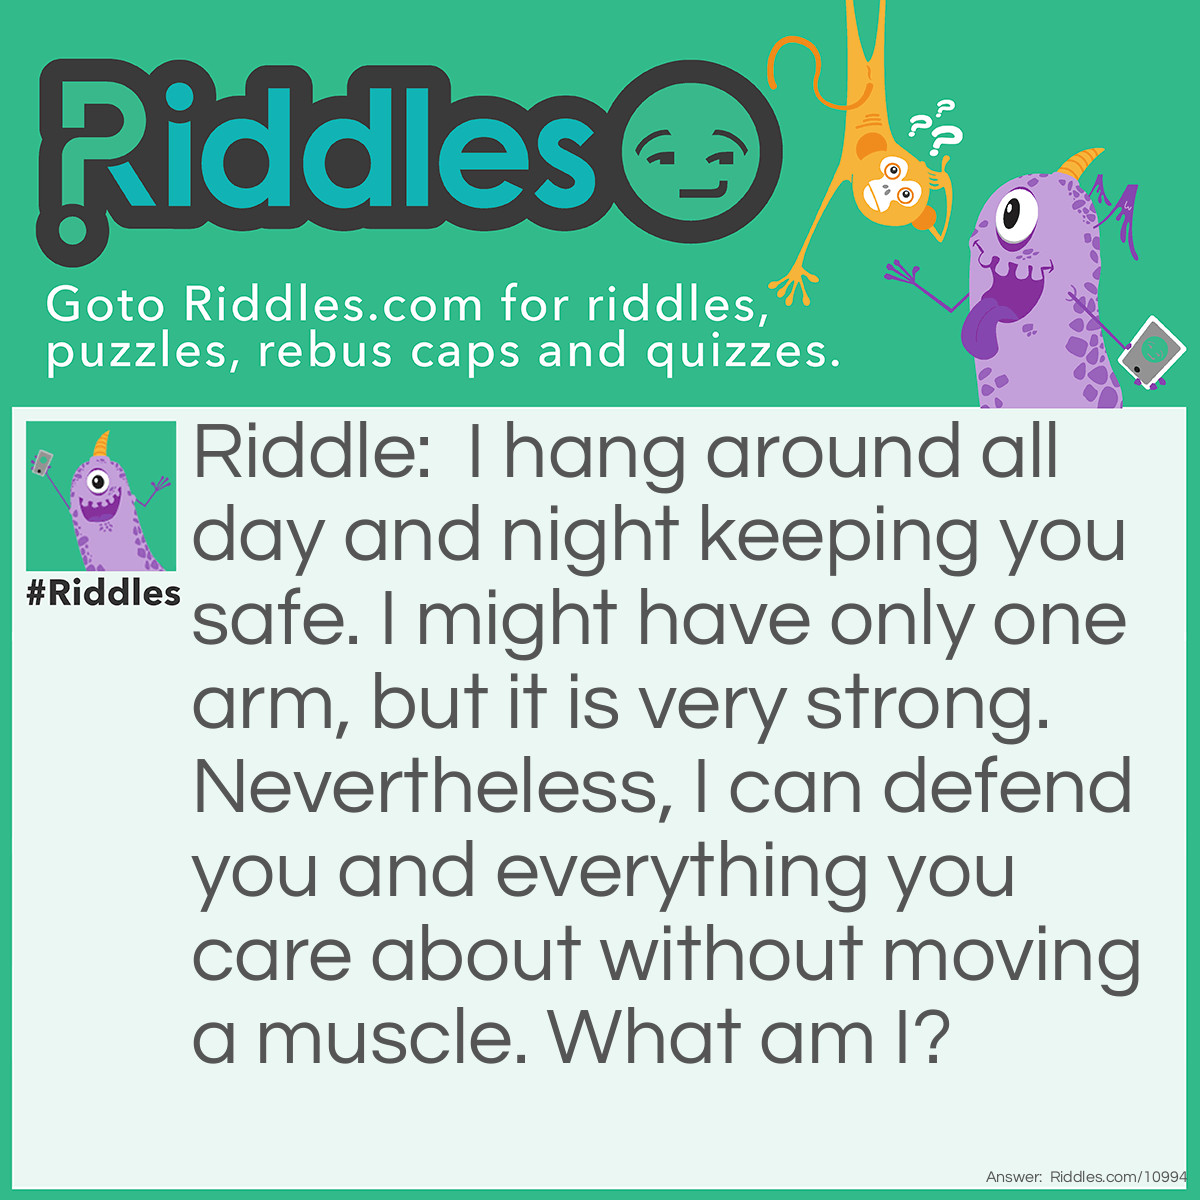 Riddle: I hang around all day and night keeping you safe. I might have only one arm, but it is very strong. Nevertheless, I can defend you and everything you care about without moving a muscle. What am I? Answer: A padlock.